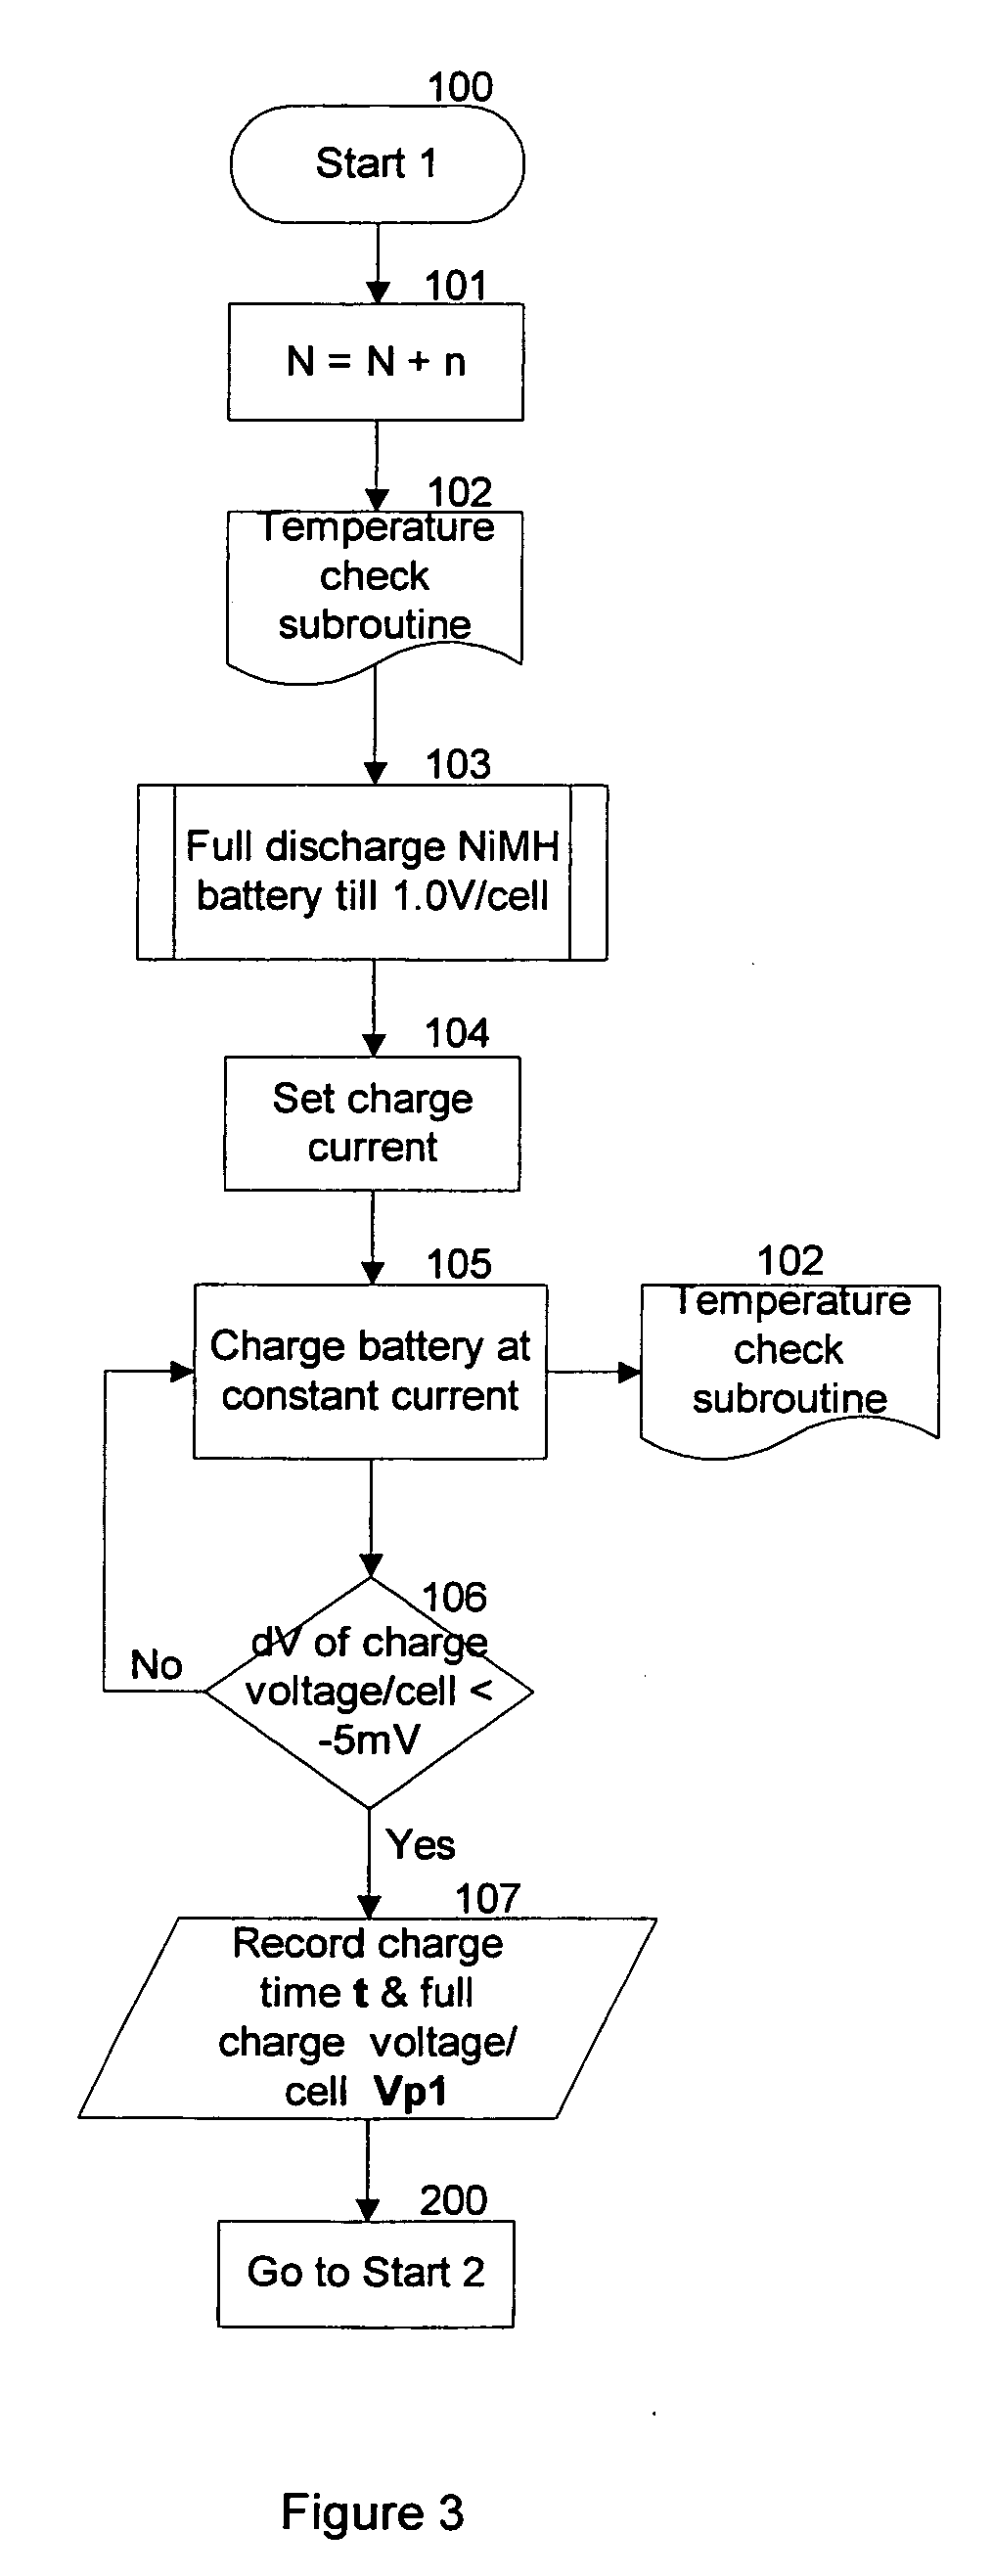 Life cycle extending batteries and battery charging means, method and apparatus